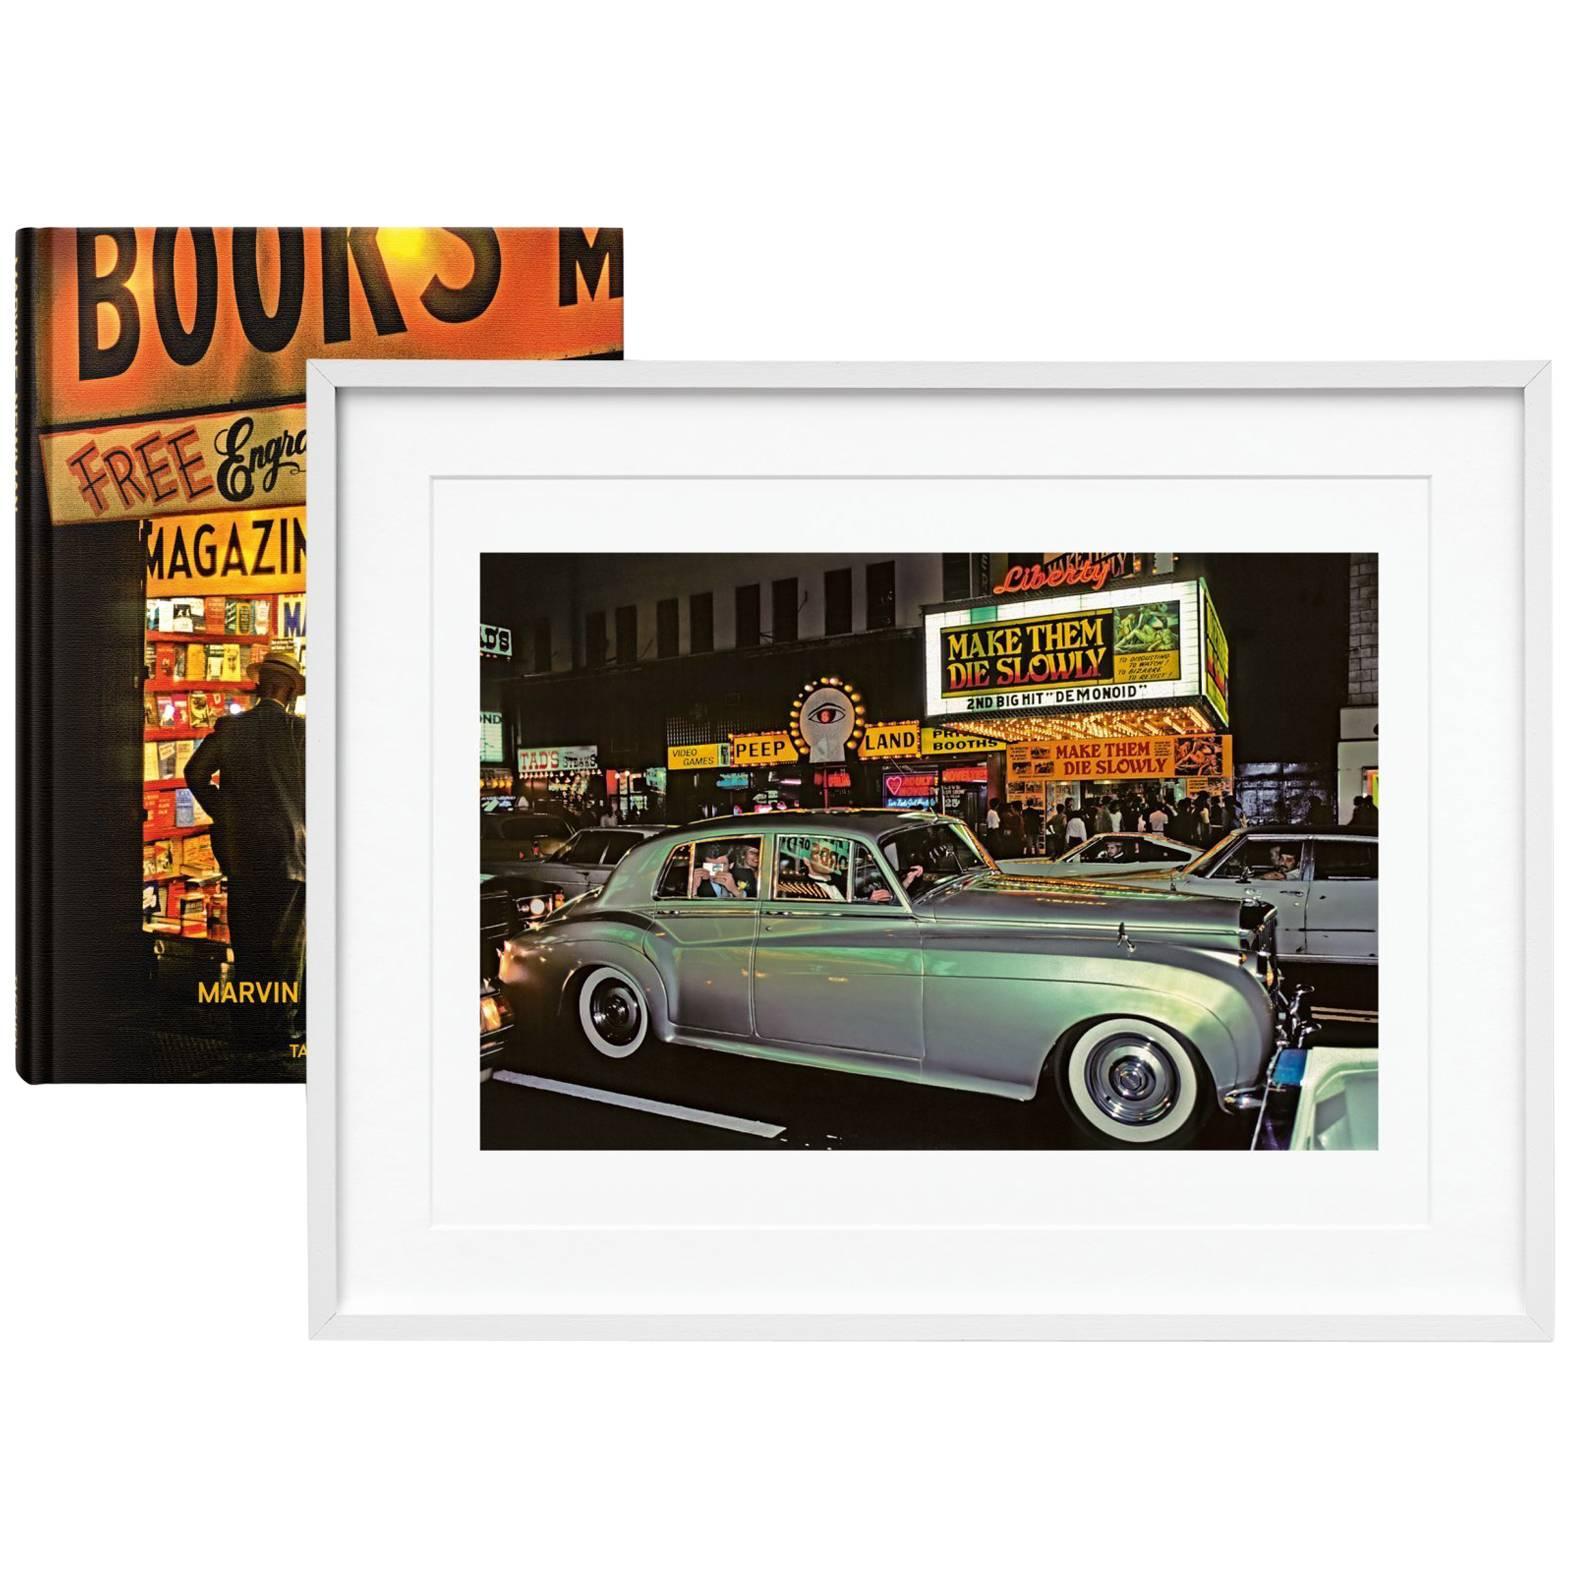 Marvin E. Newman Art Edition "42nd Street, 1983" For Sale